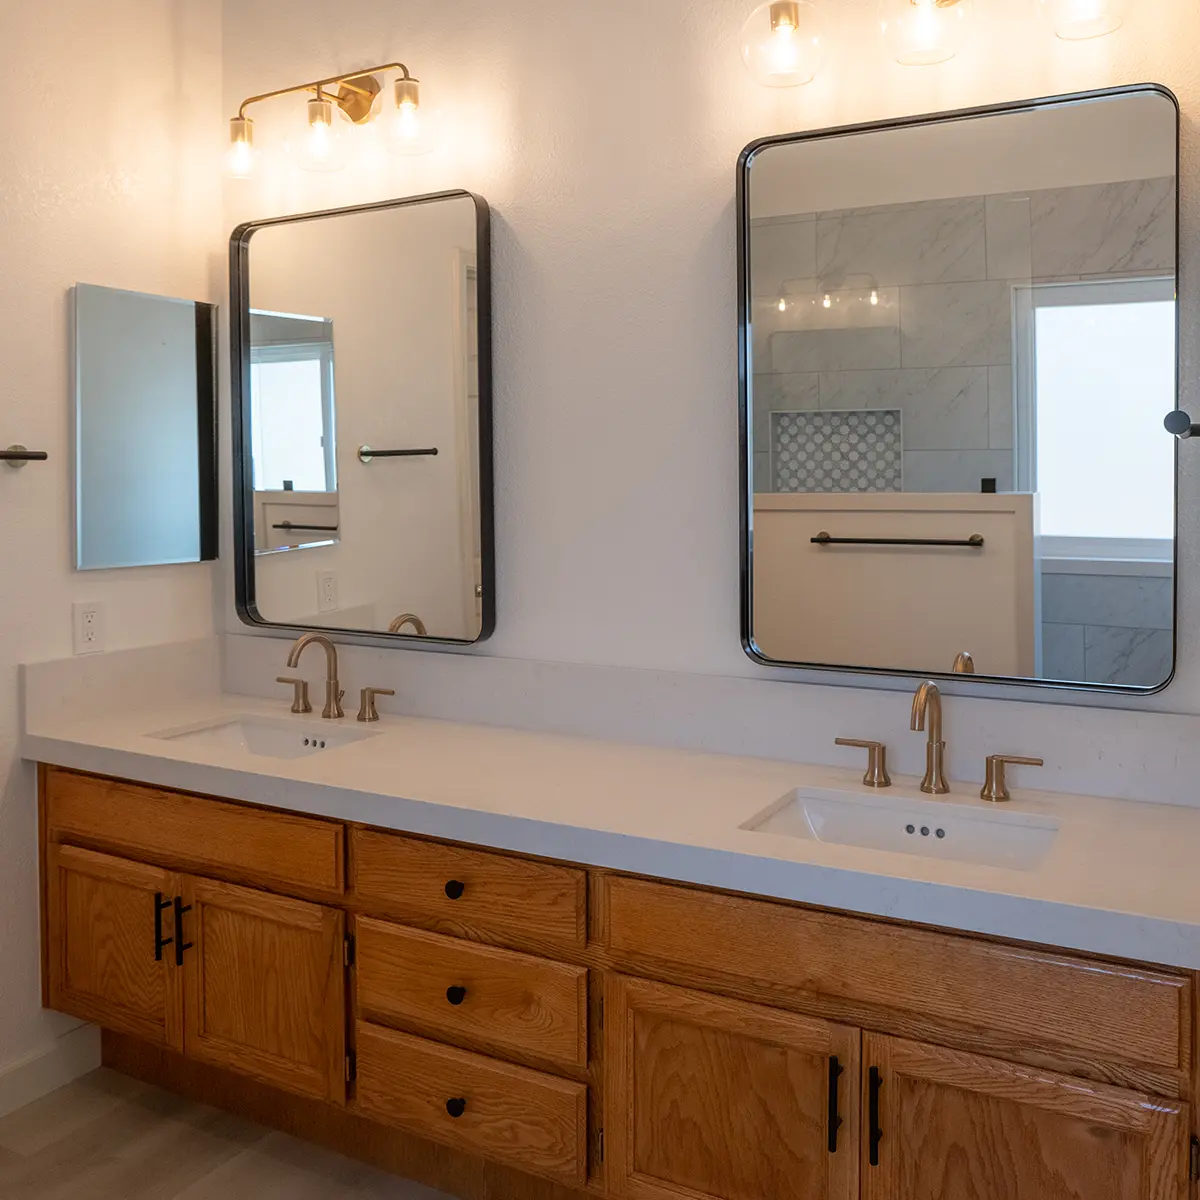 A new bathroom with wood cabinets on a double vanity and large square mirrors